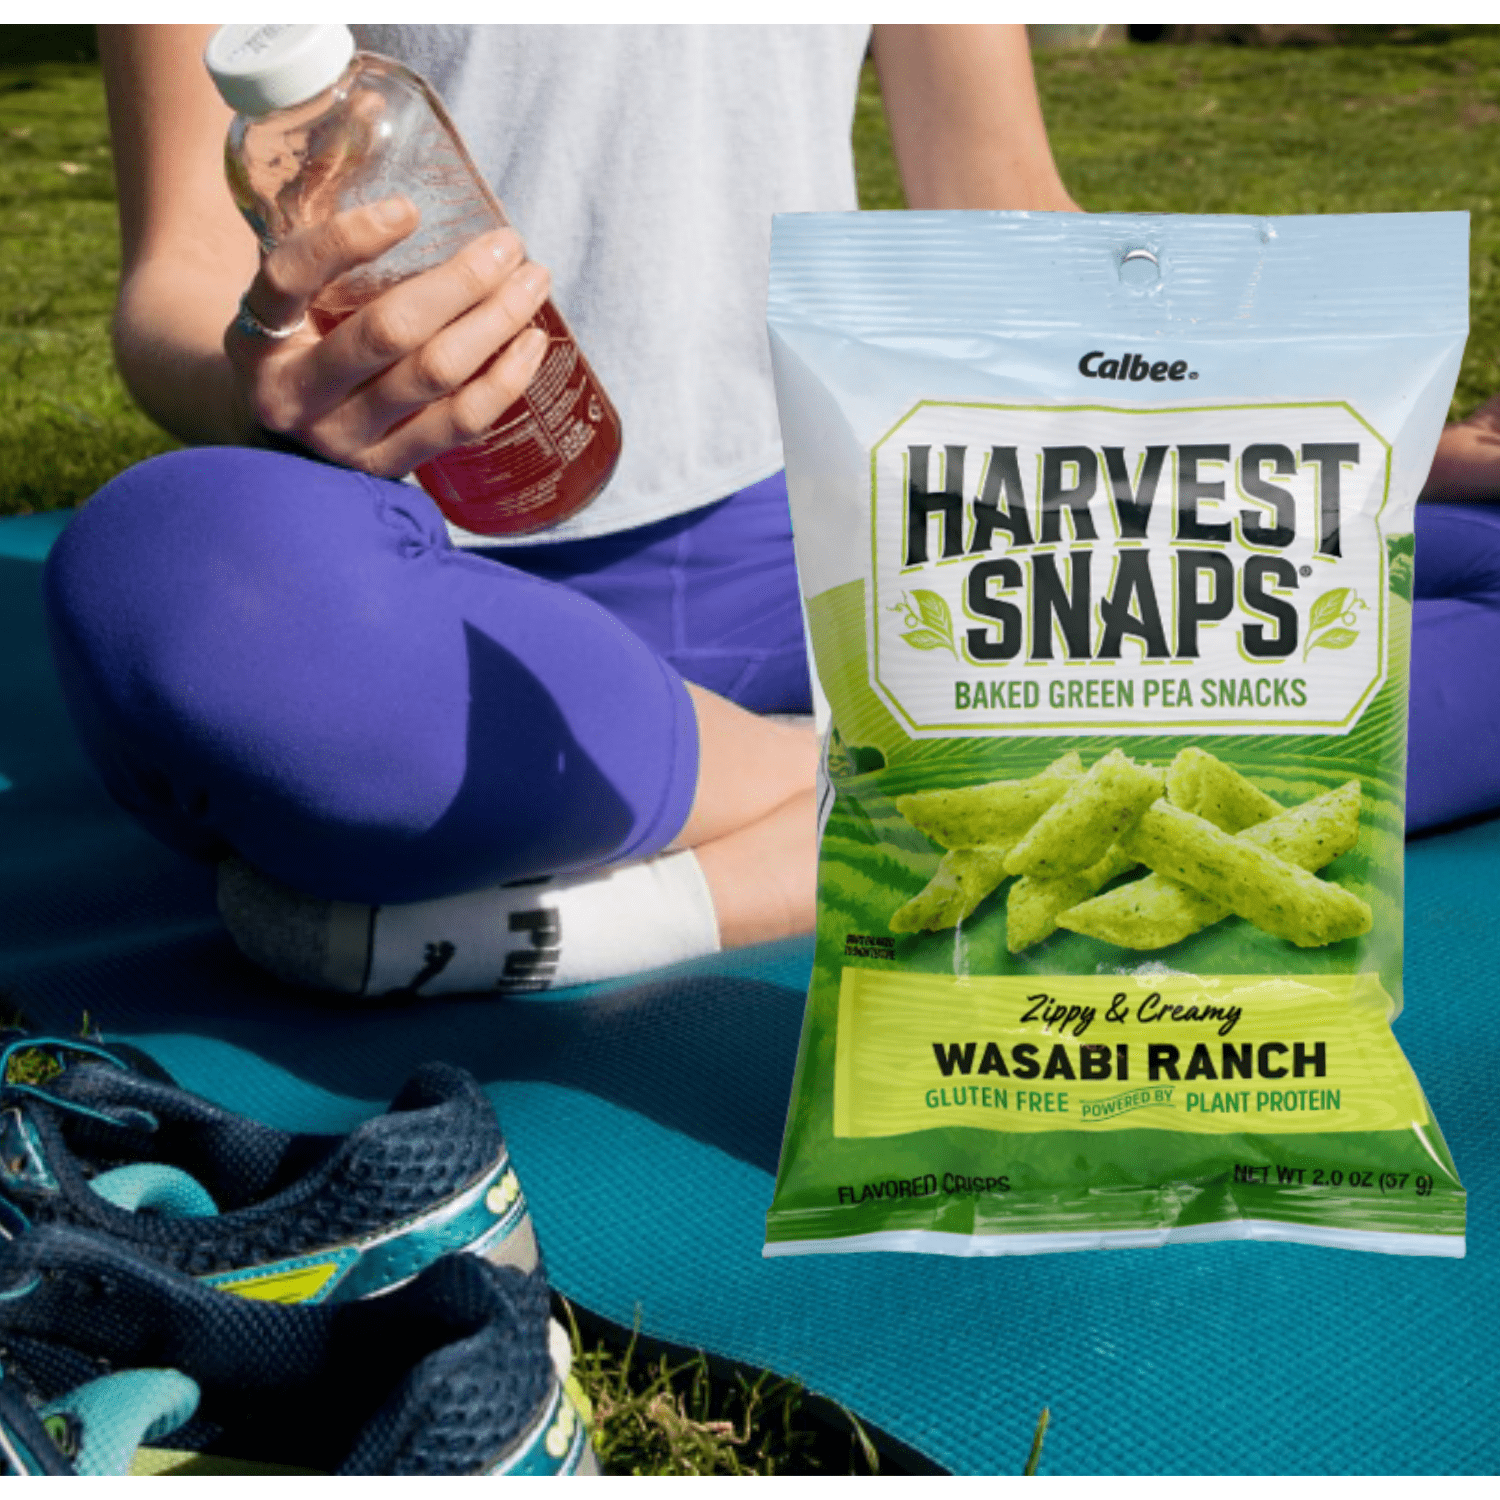 Snack Time: Harvest Snaps Baked Green Pea Snacks Parmesan and Roasted  Garlic – Ms. Mimsy Reviews